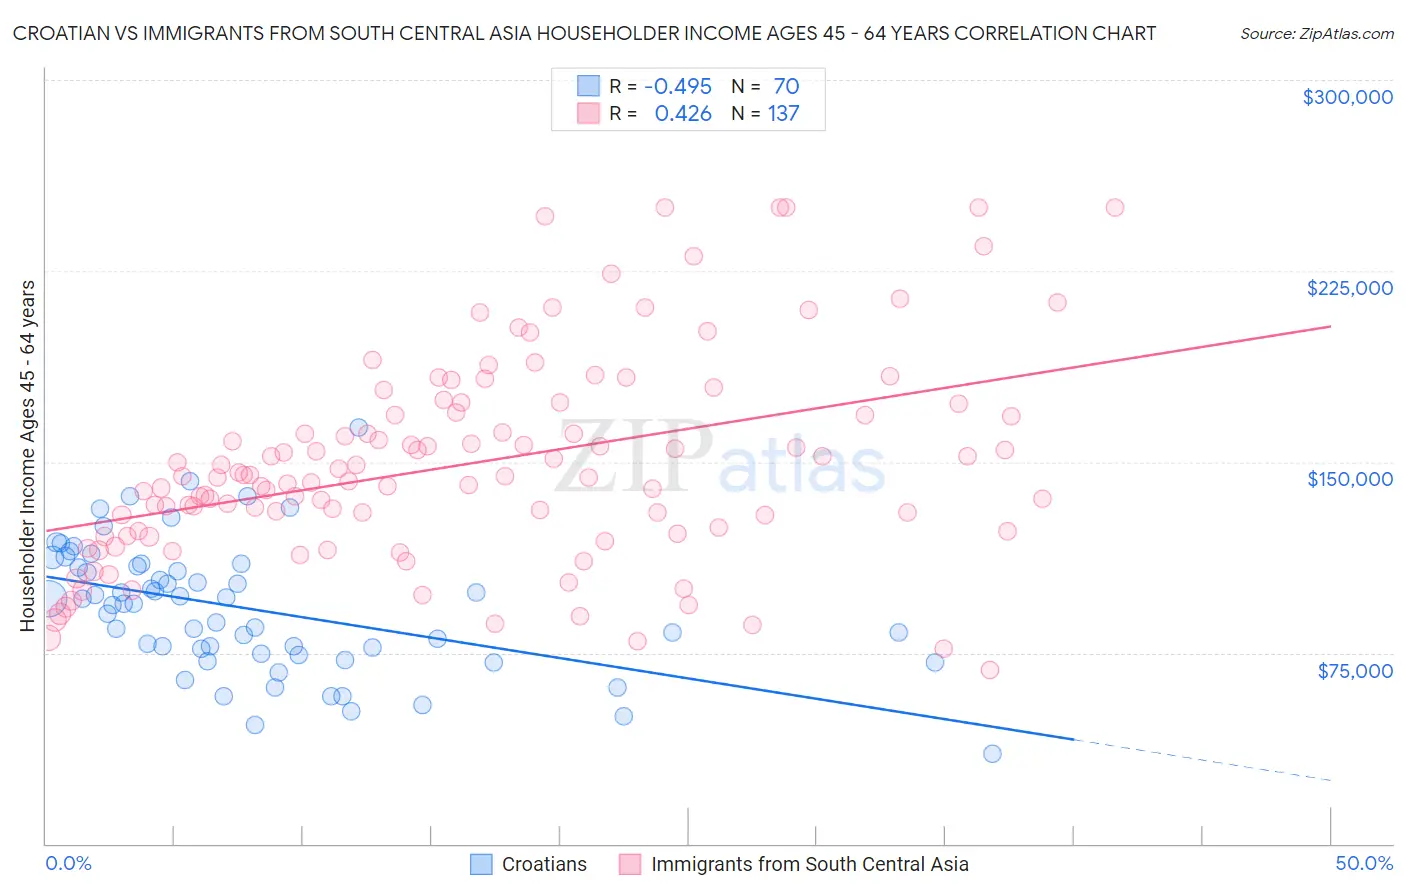 Croatian vs Immigrants from South Central Asia Householder Income Ages 45 - 64 years